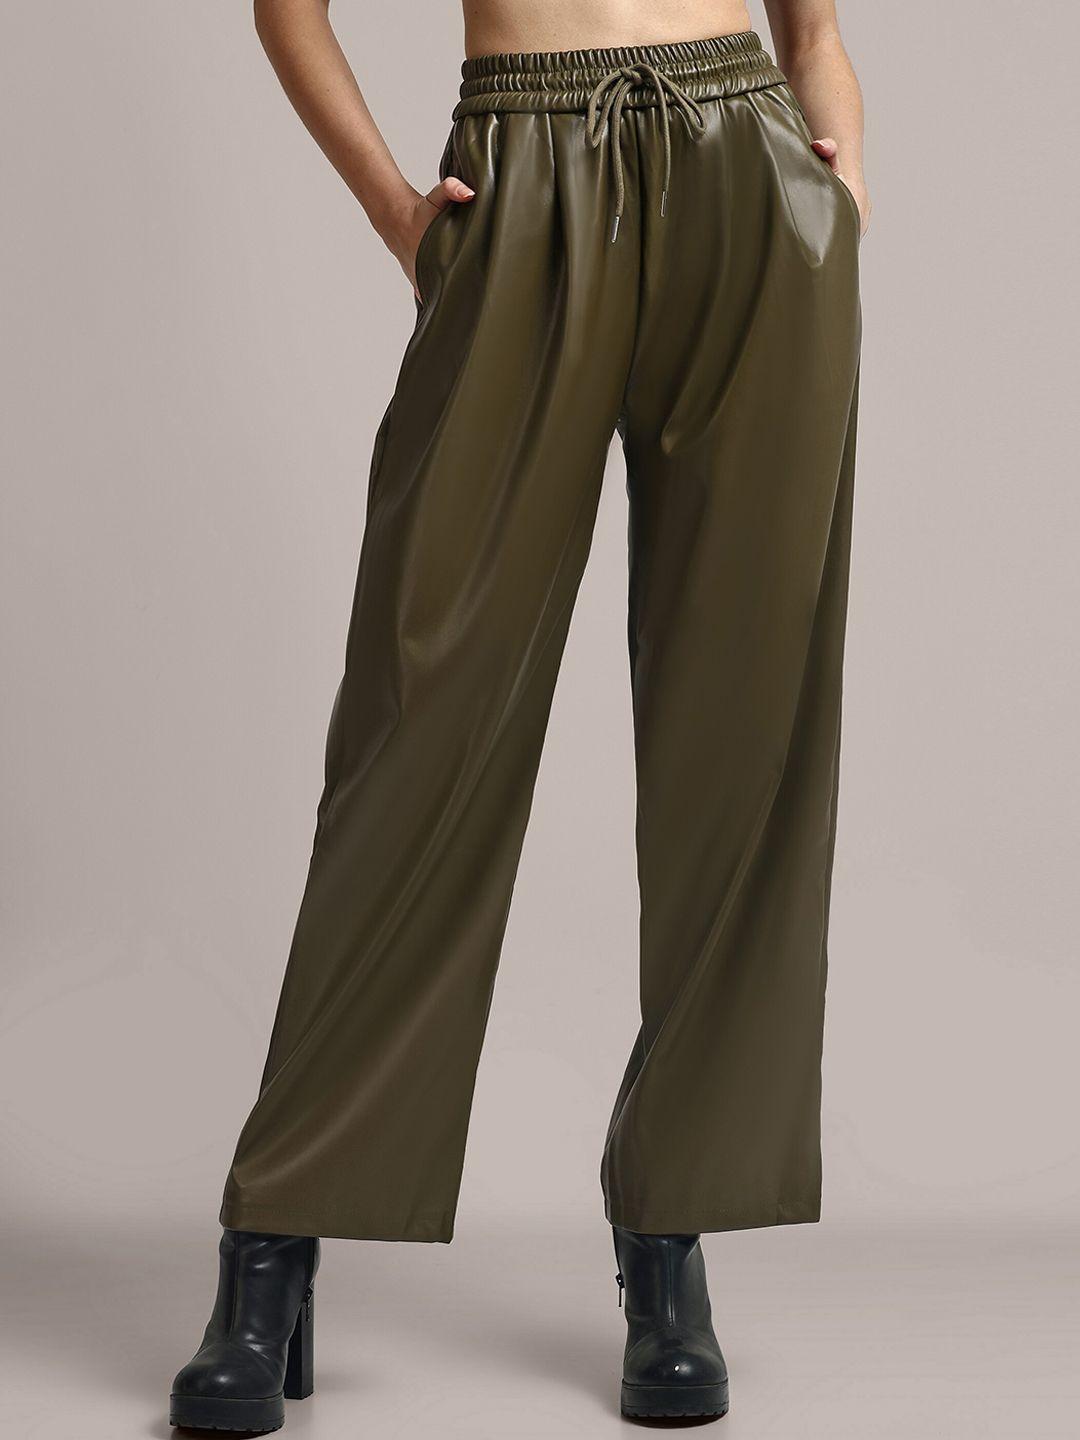 iki chic women high-rise non iron pleated parallel trousers